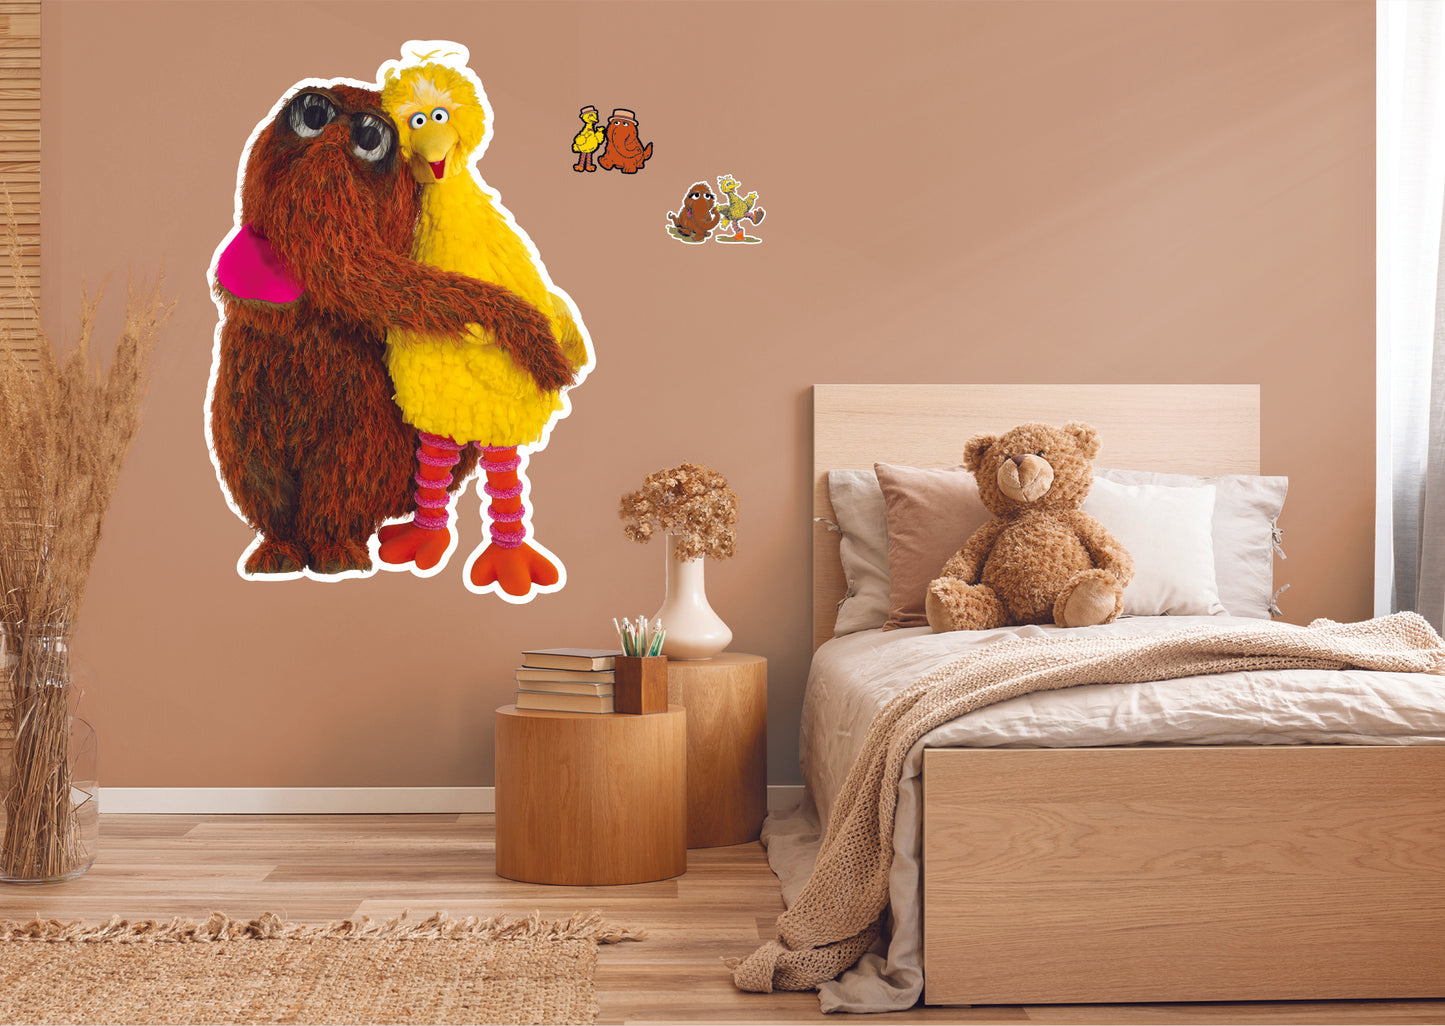 Snuffleupagus and Big Bird RealBig - Officially Licensed Sesame Street Removable Adhesive Decal